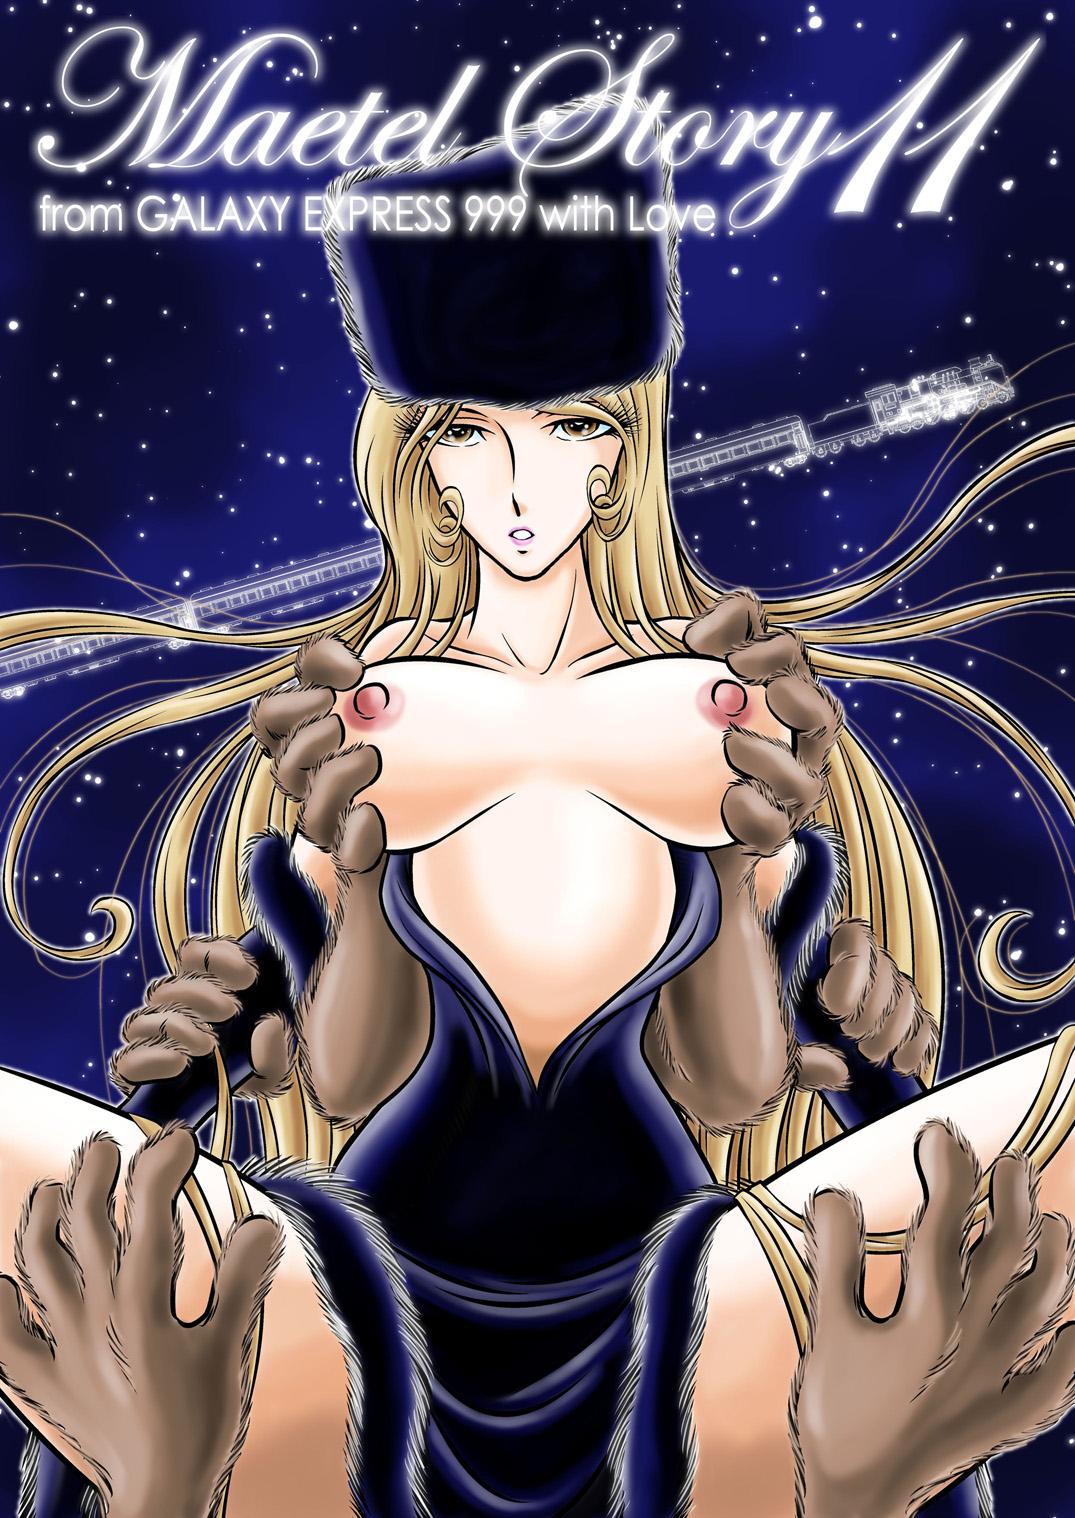 Edging Maetel Story 11 - Galaxy express 999 Amatuer - Picture 1